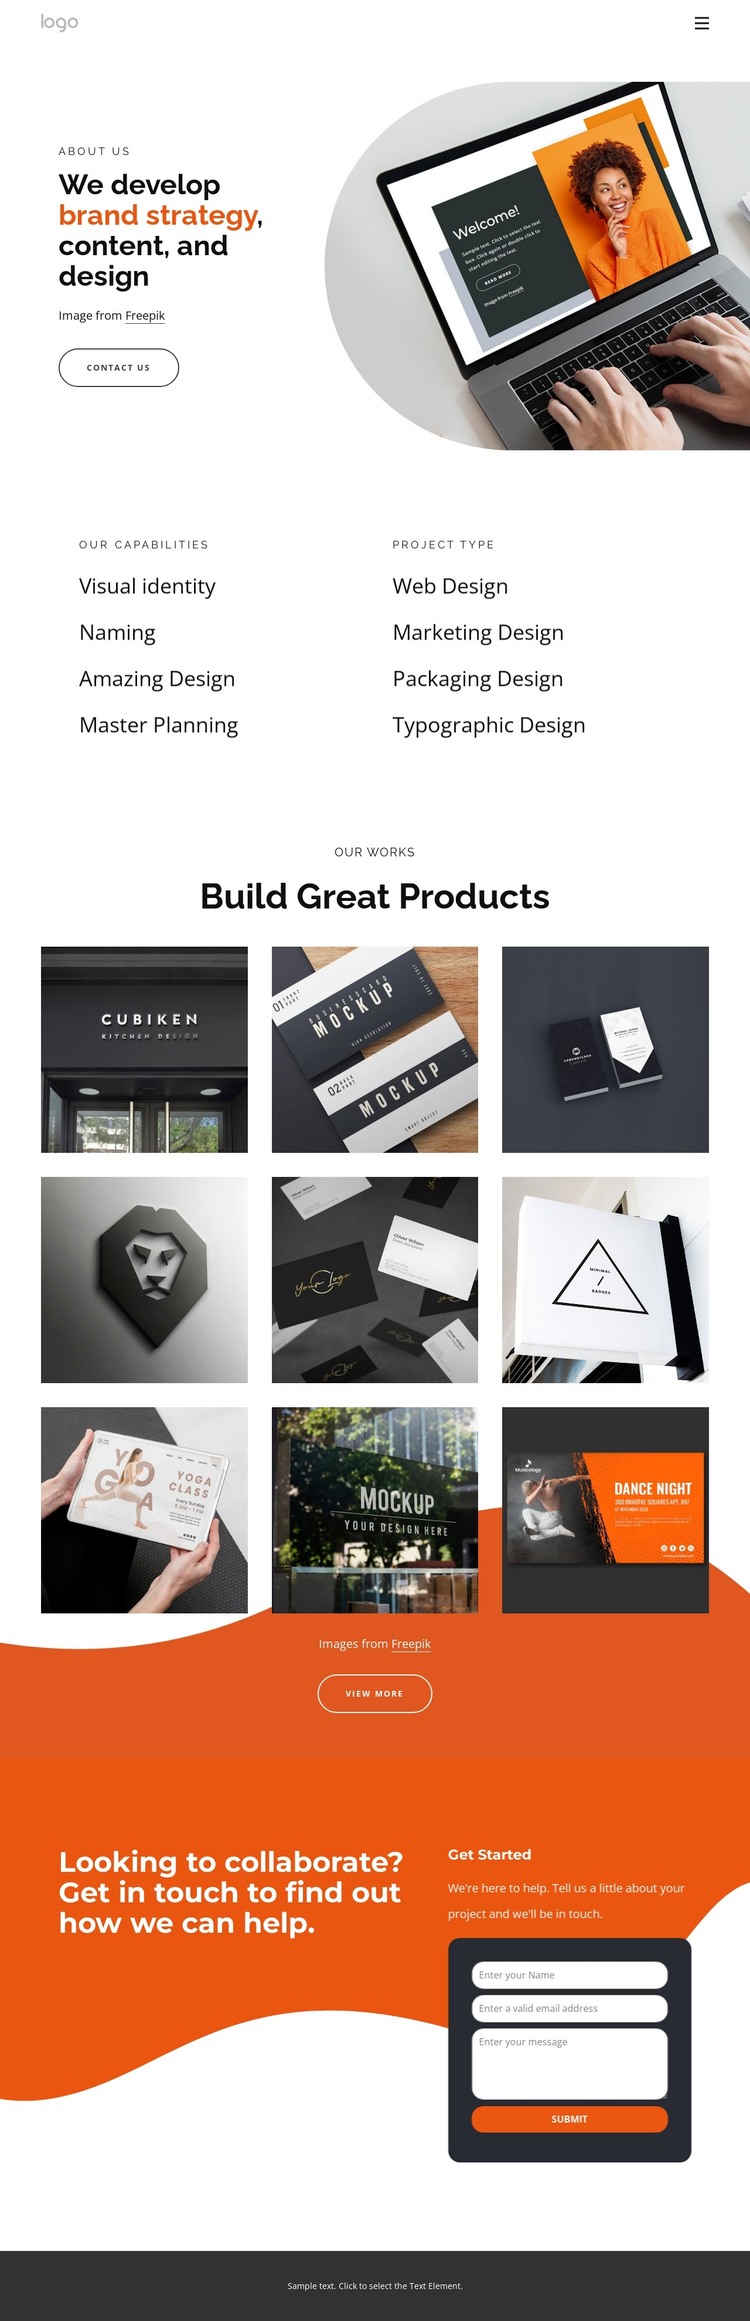 We create thoughtful experiences for humans WordPress Theme